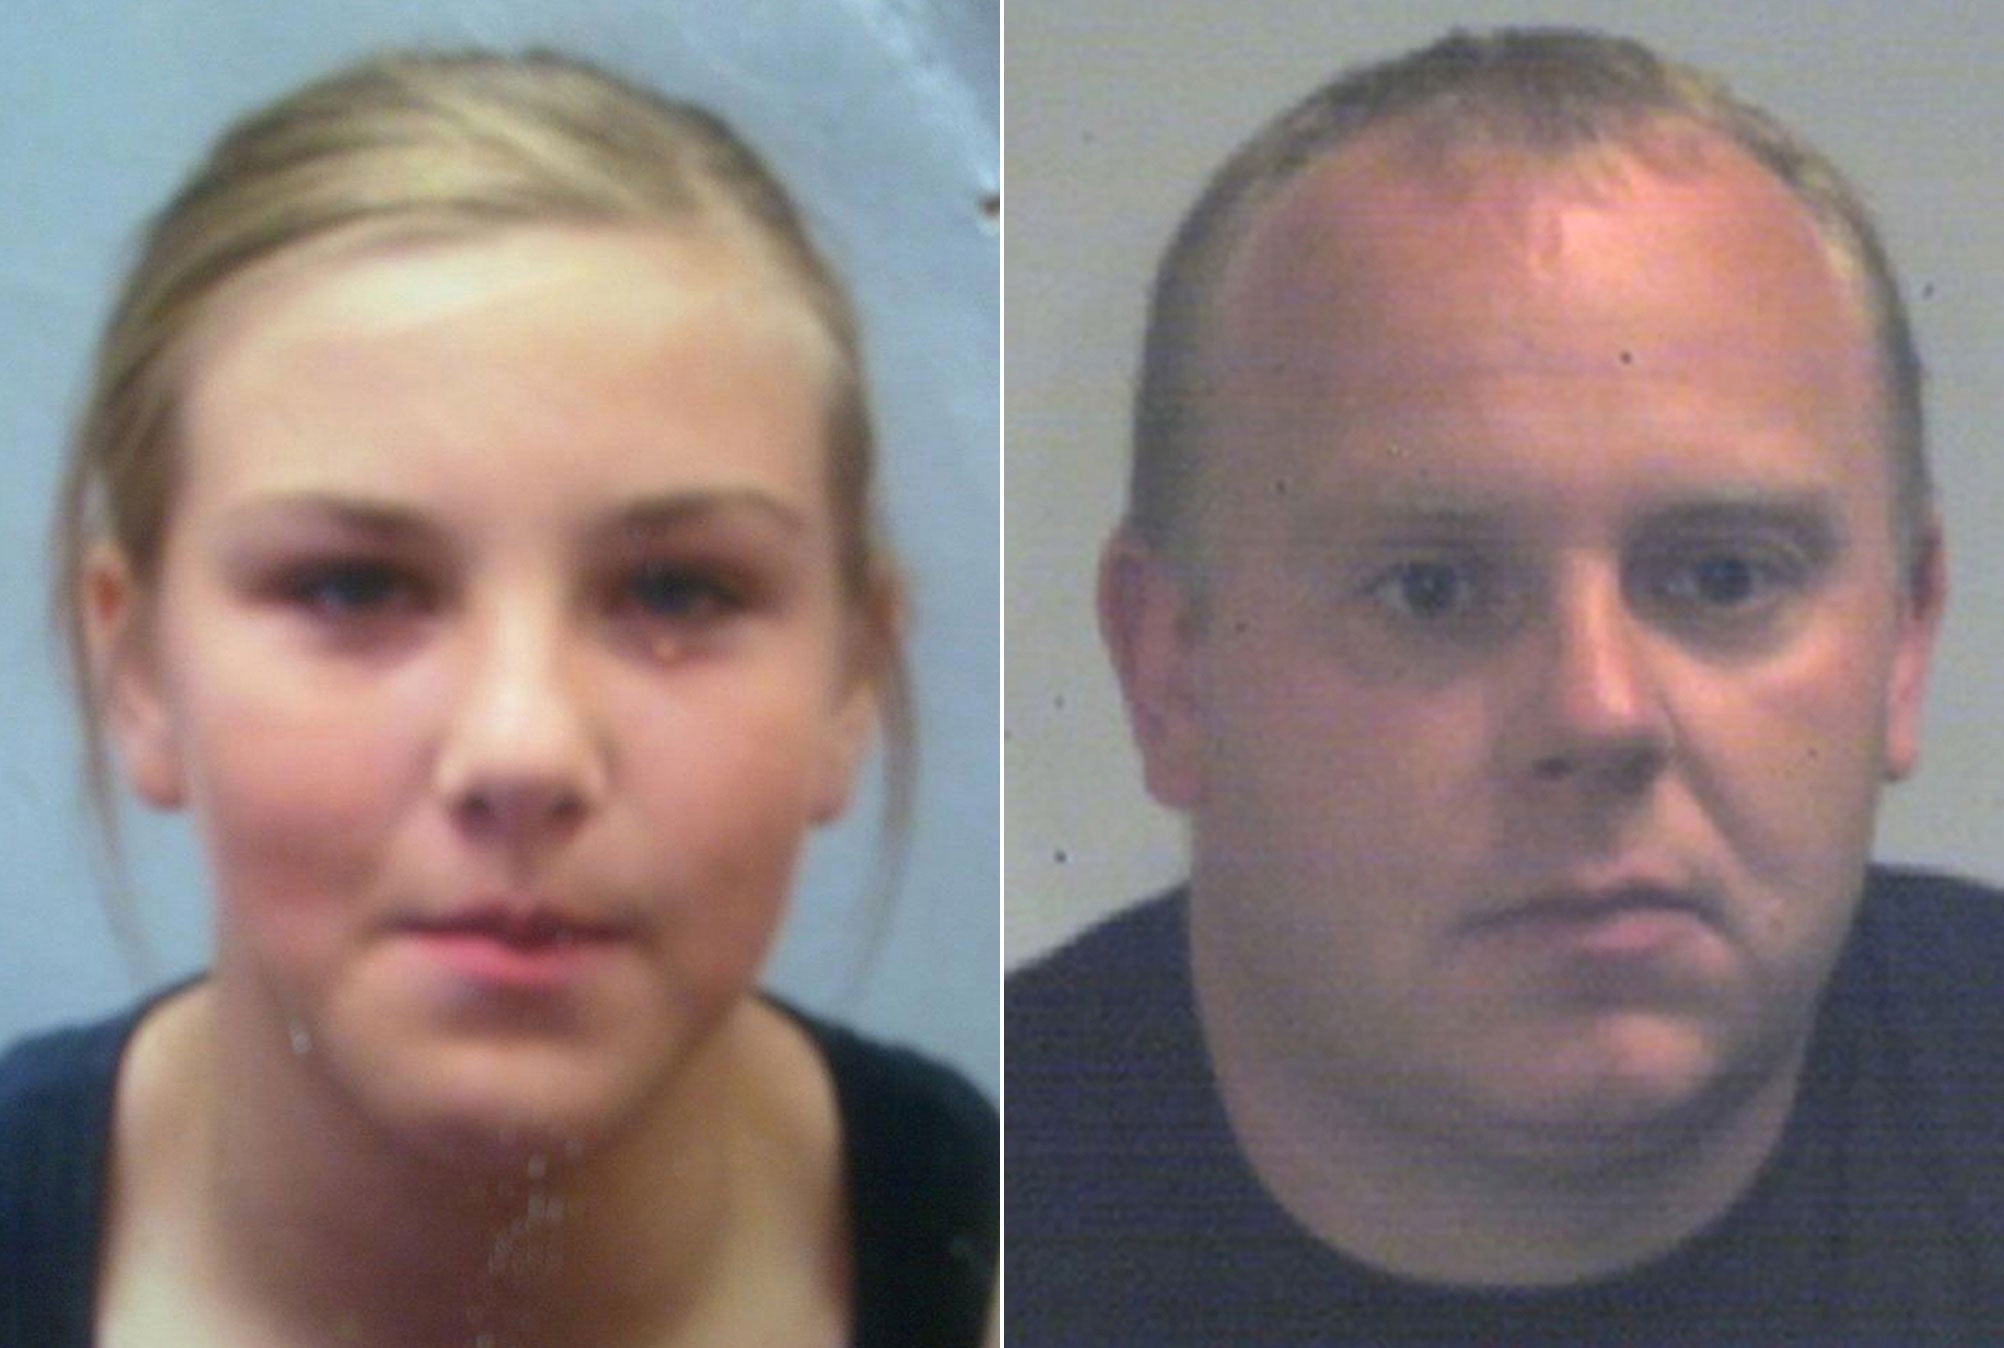 Missing 14 year old girl Lorna Vickerage, left and John Bush, right, 35. The teenager has been missing since 10 June and police believe she has vanished with a man over twice her age, believed to be John Bush